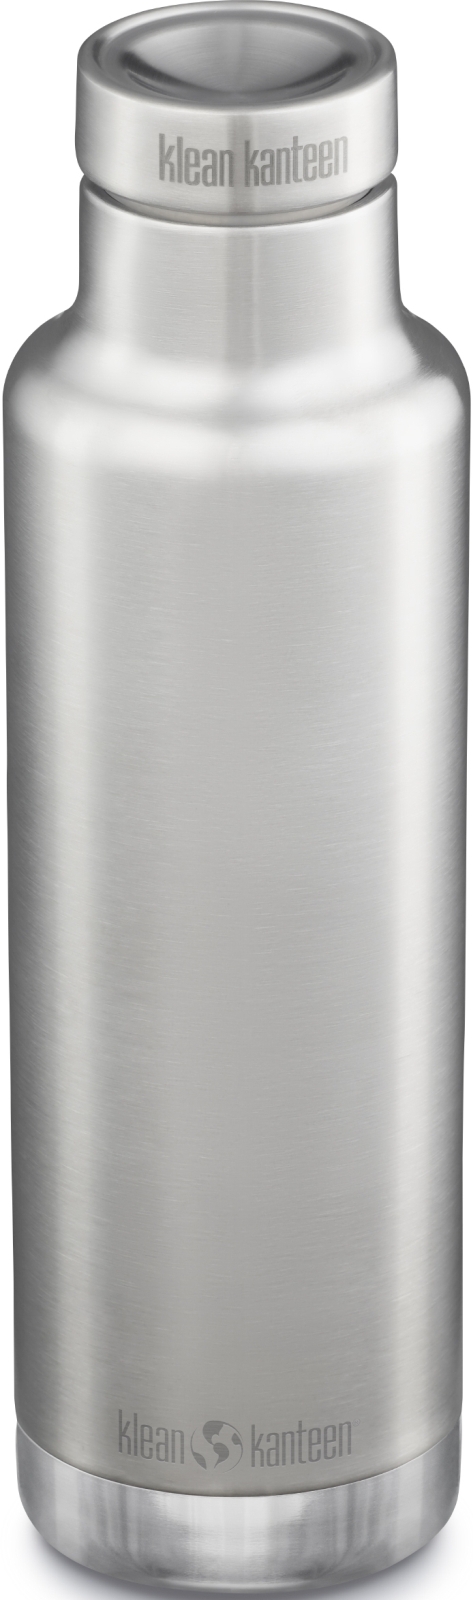 Klean Kanteen Insulated Classic Narrow w/Pour Through Cap - Brushed Stainless 750 ml